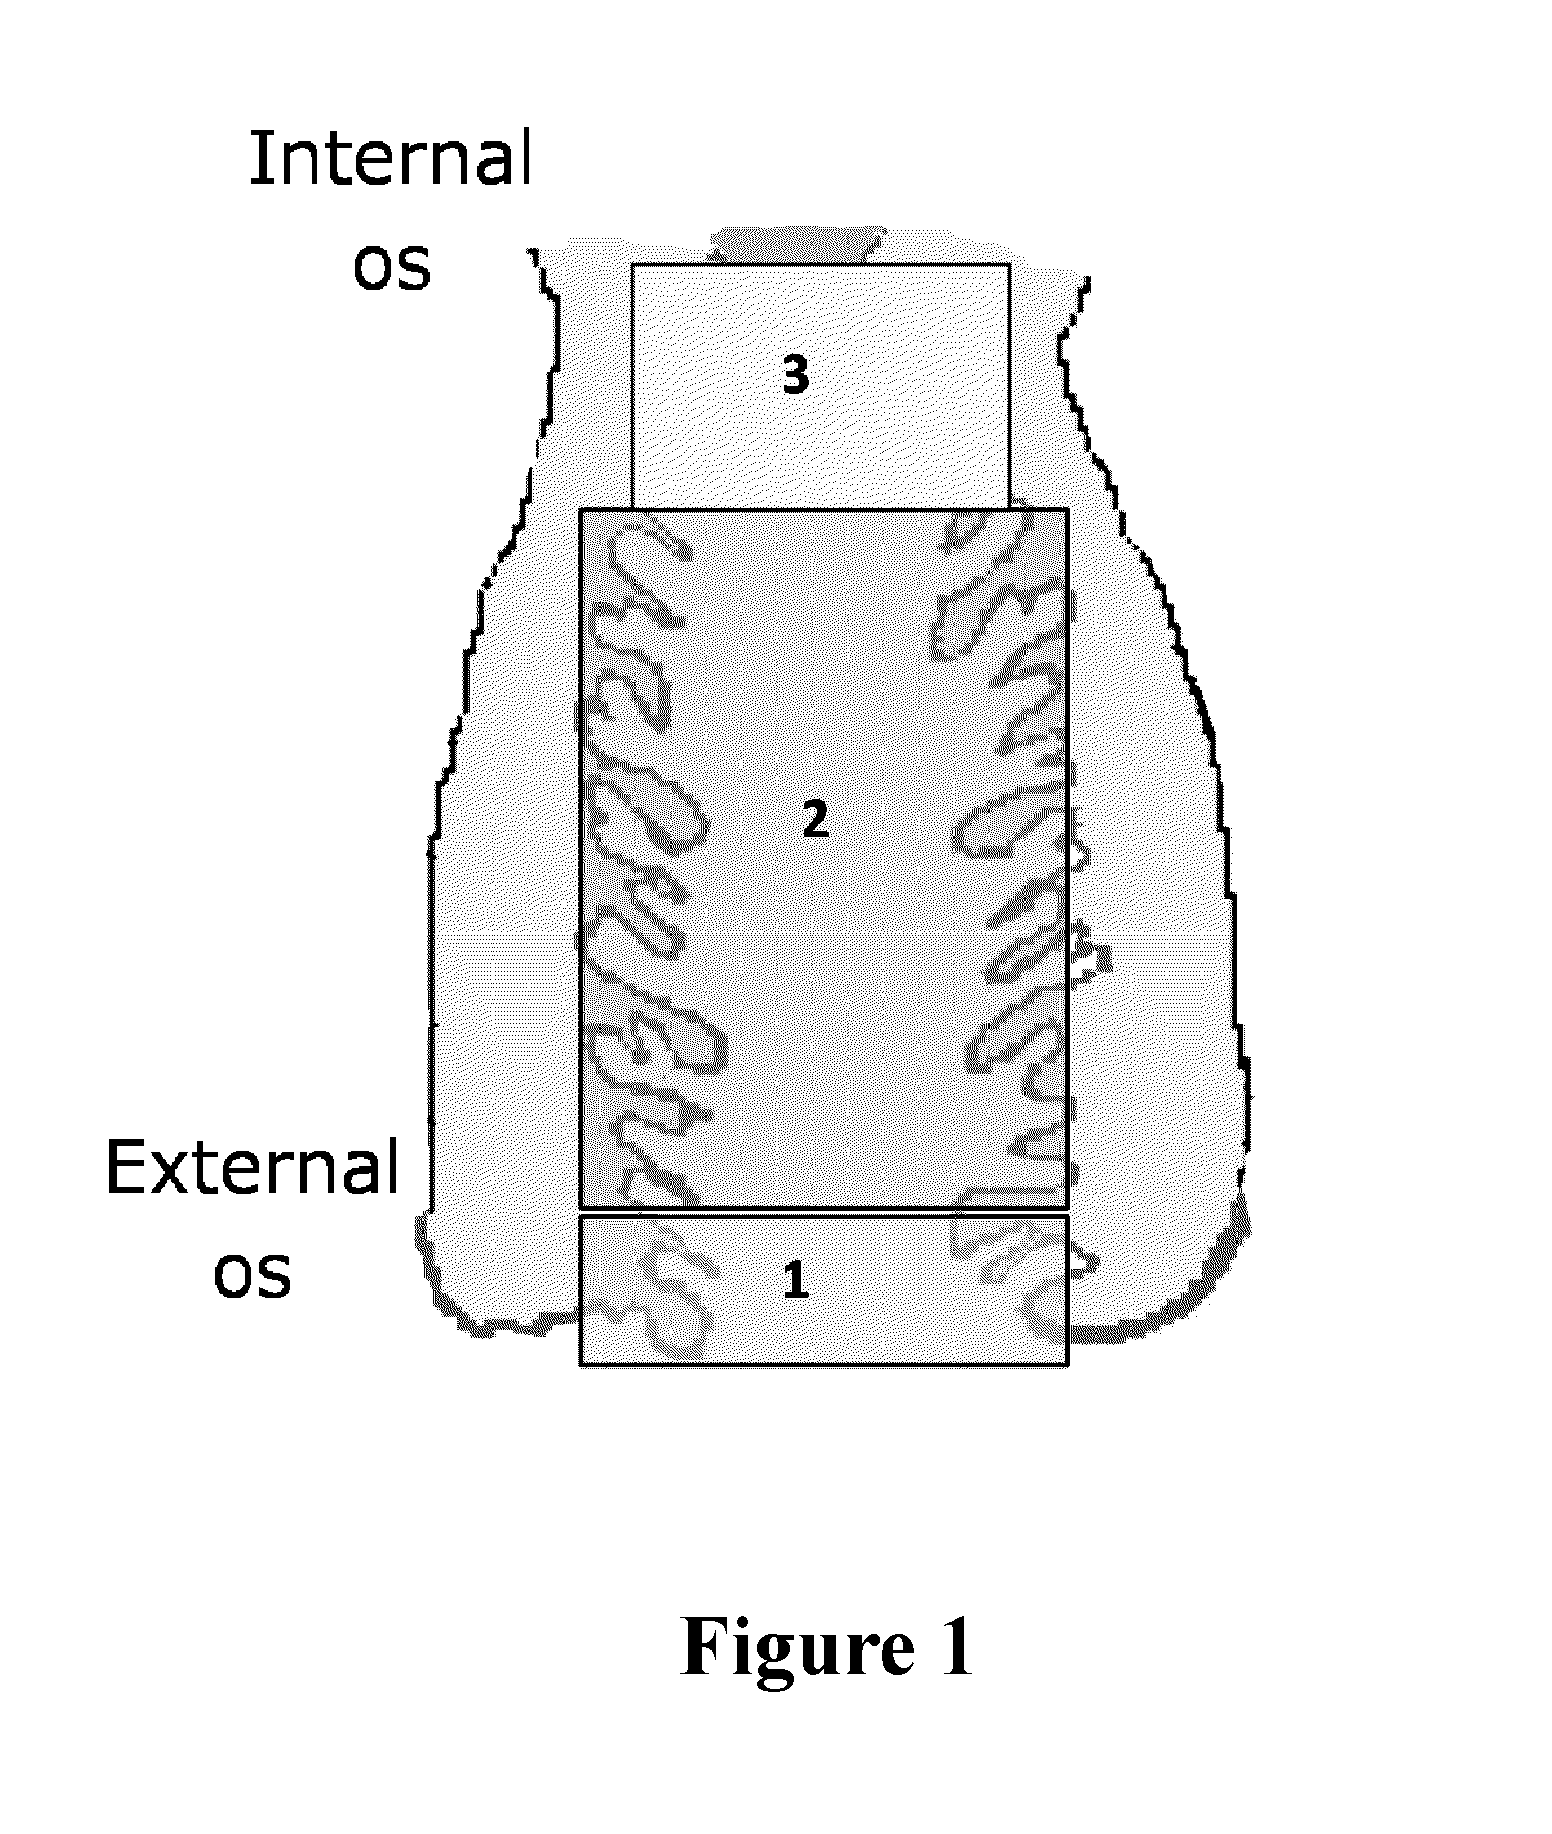 Methods of enriching and detecting fetal nucleic acids